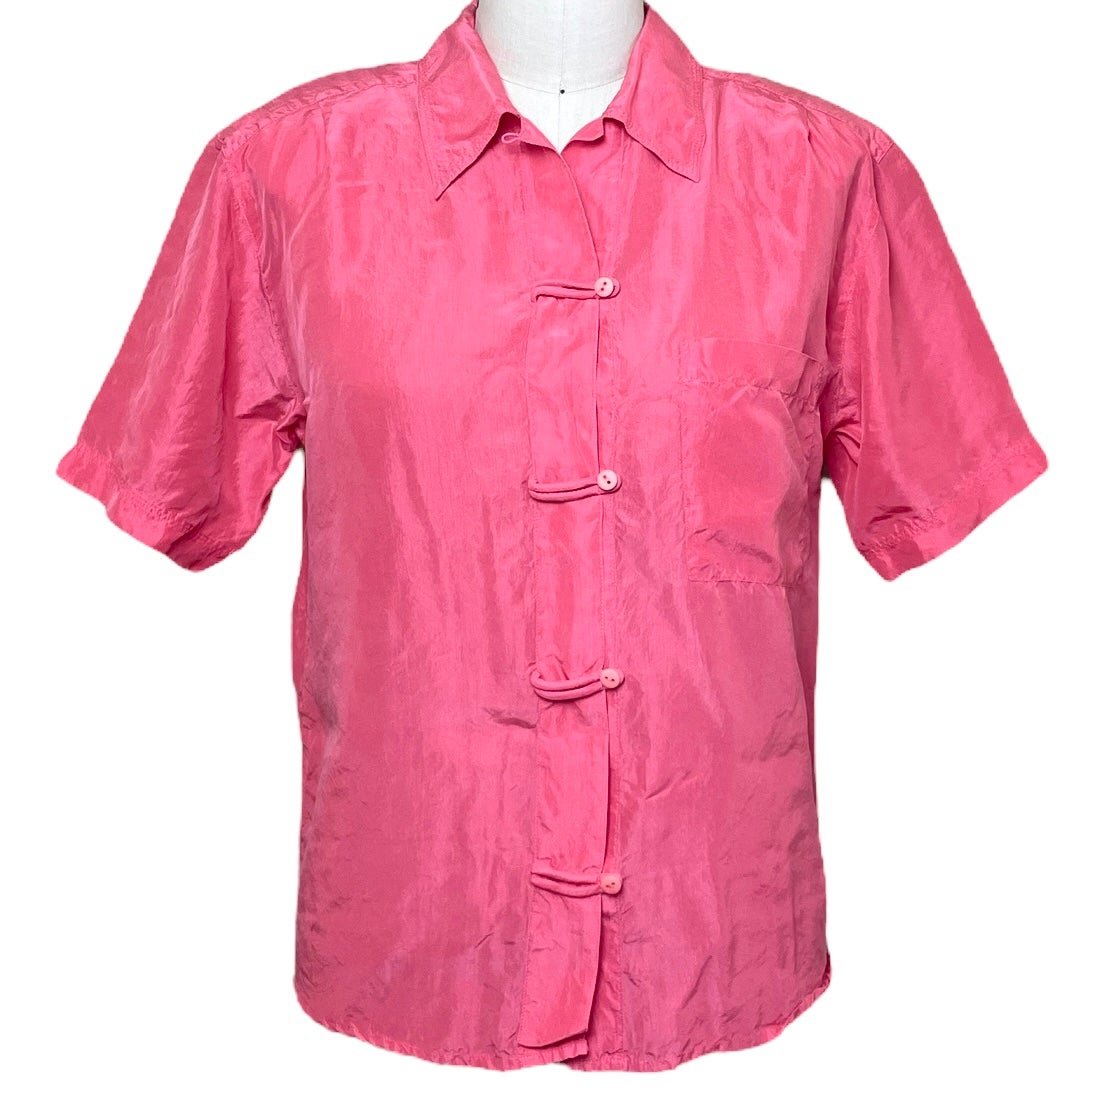 Stylish Vintage 90s The Limited Silk Shirt Blouse Collared Pink XS mhRETZmc4 all for you